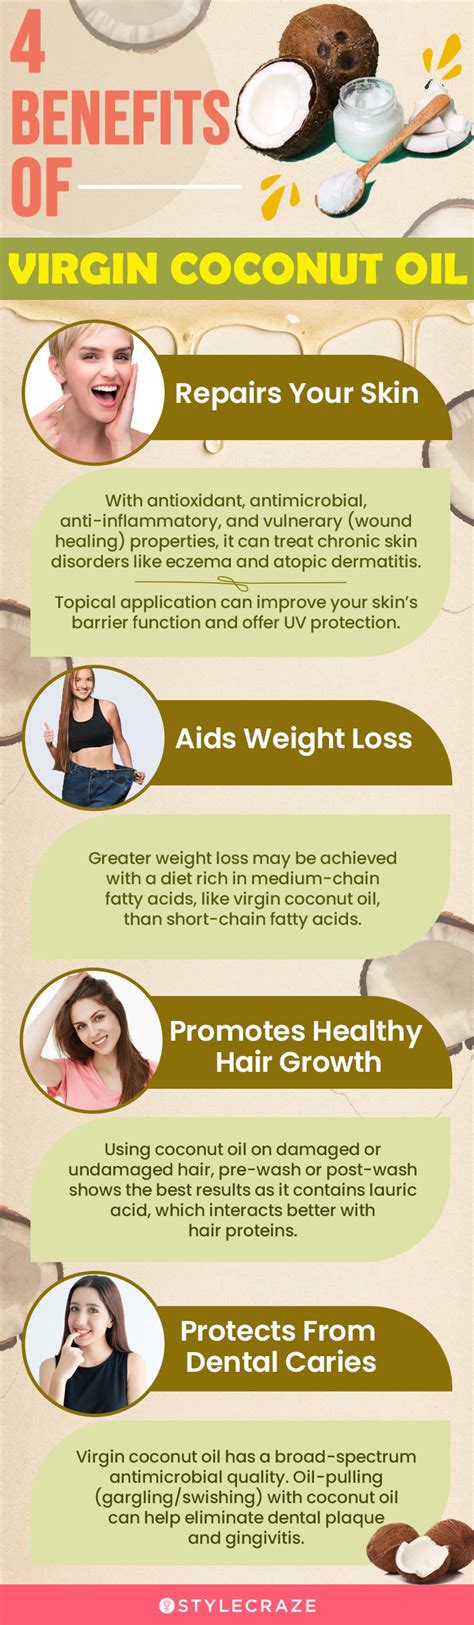 Virgin Coconut Oil Benefits Uses And Side Effects